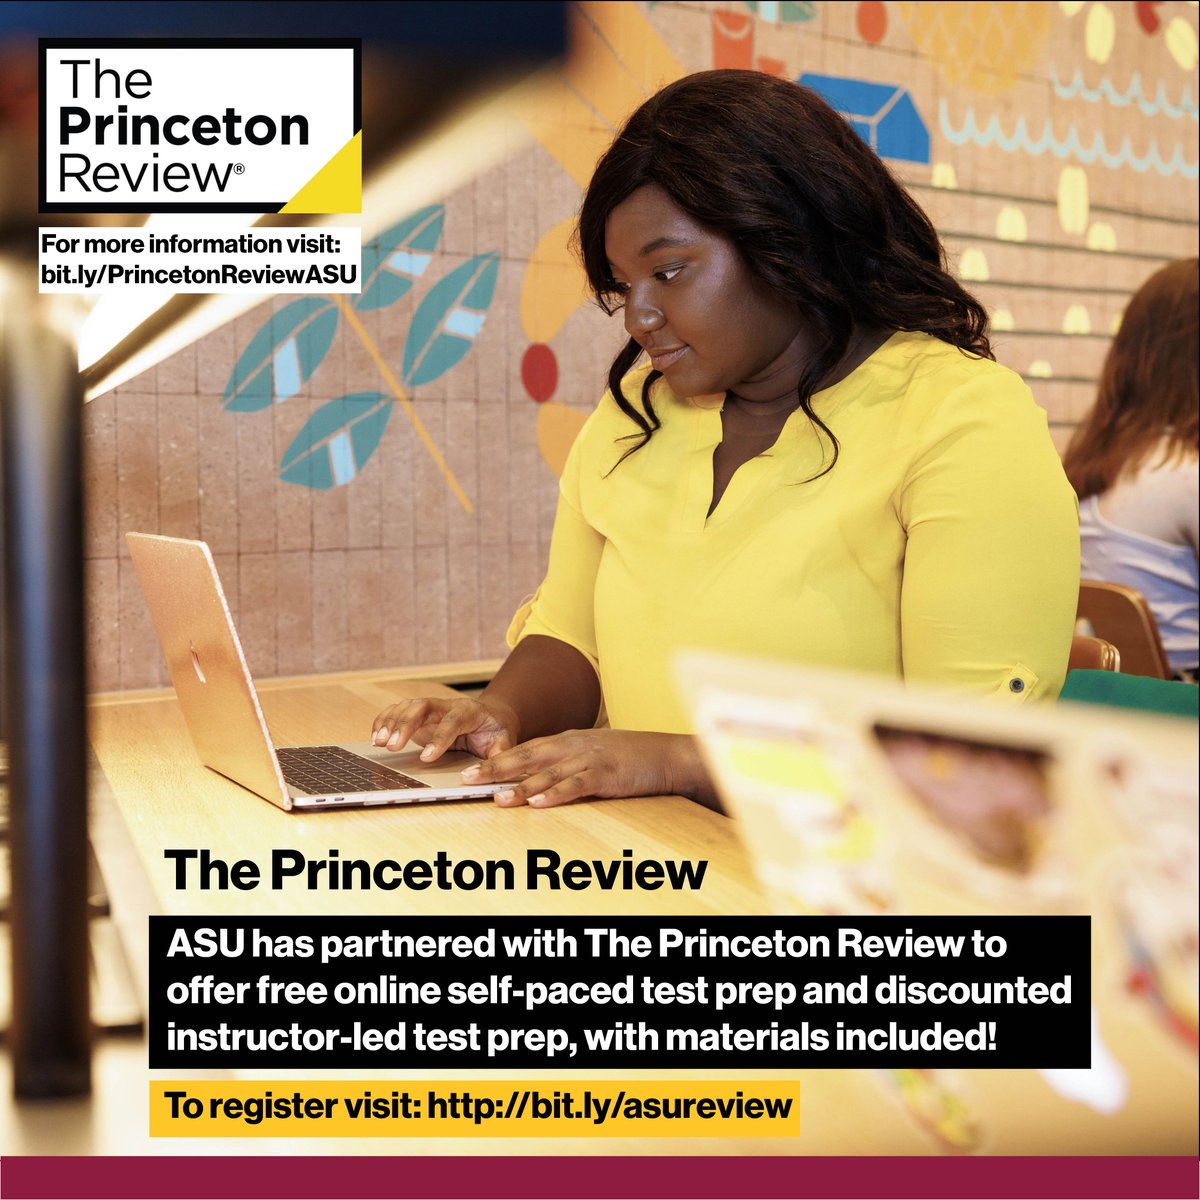 Score big on your next big test with the help of Career and Professional Development Services at ASU! We've partnered with The Princeton Review to offer free test prep resources. Sign up today here: bit.ly/asureview

 #testpreparation #ASUcareercenter #ThePrincetonReview